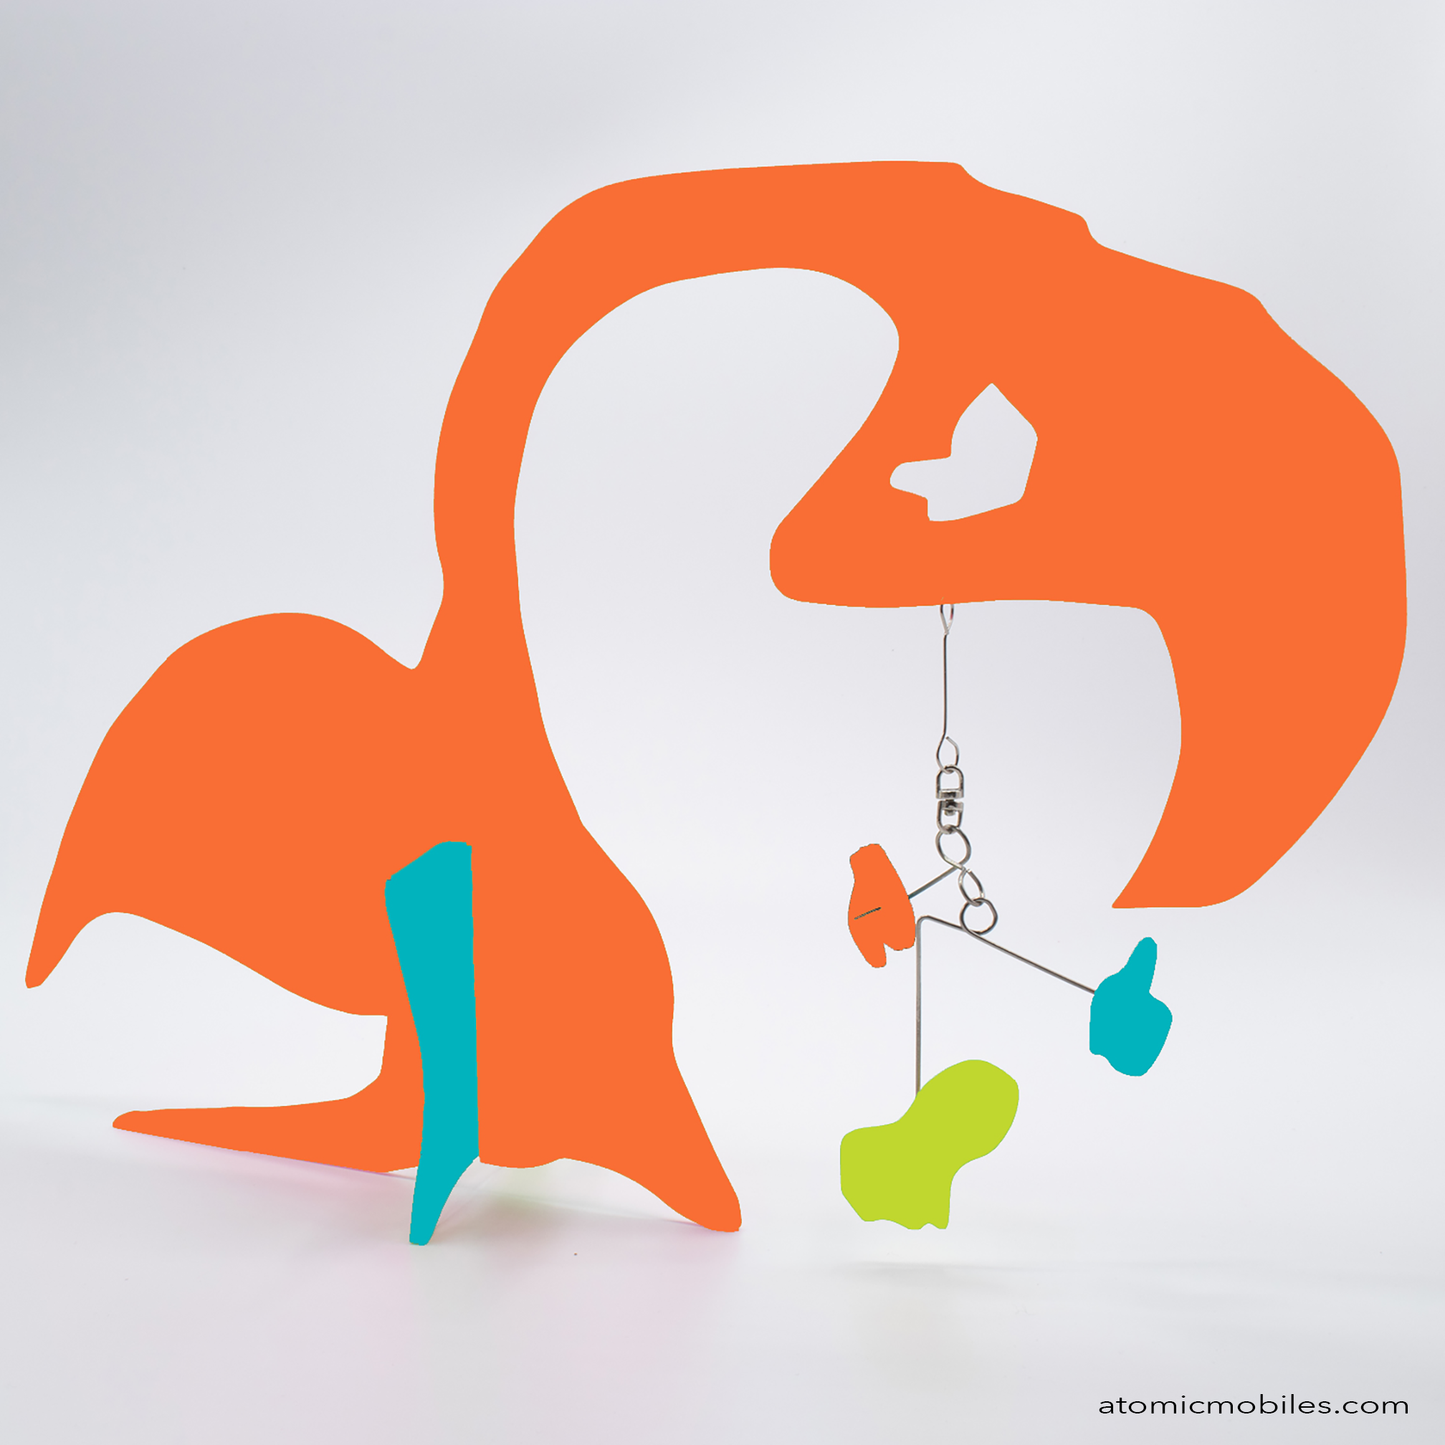 KinetiCats Collection Flamingo in Orange, Aqua, Lime Green - one of 12 Modern Cute Abstract Animal Art Sculpture Kinetic Stabiles inspired by Dada and mid century modern style art by AtomicMobiles.com